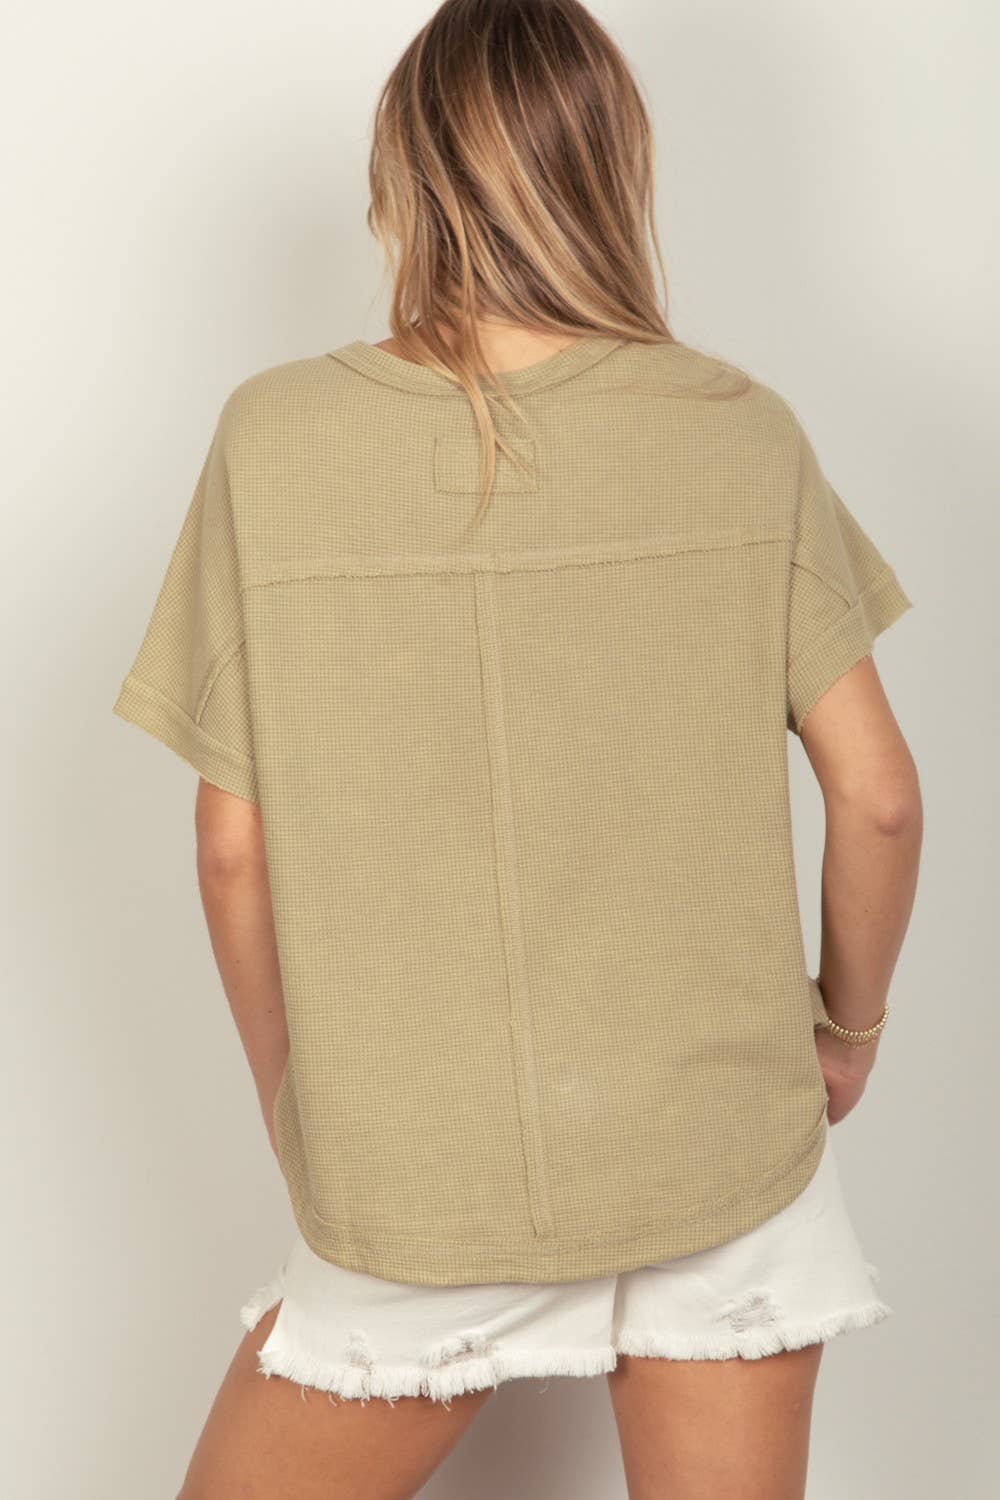 The Margo Top in Sage